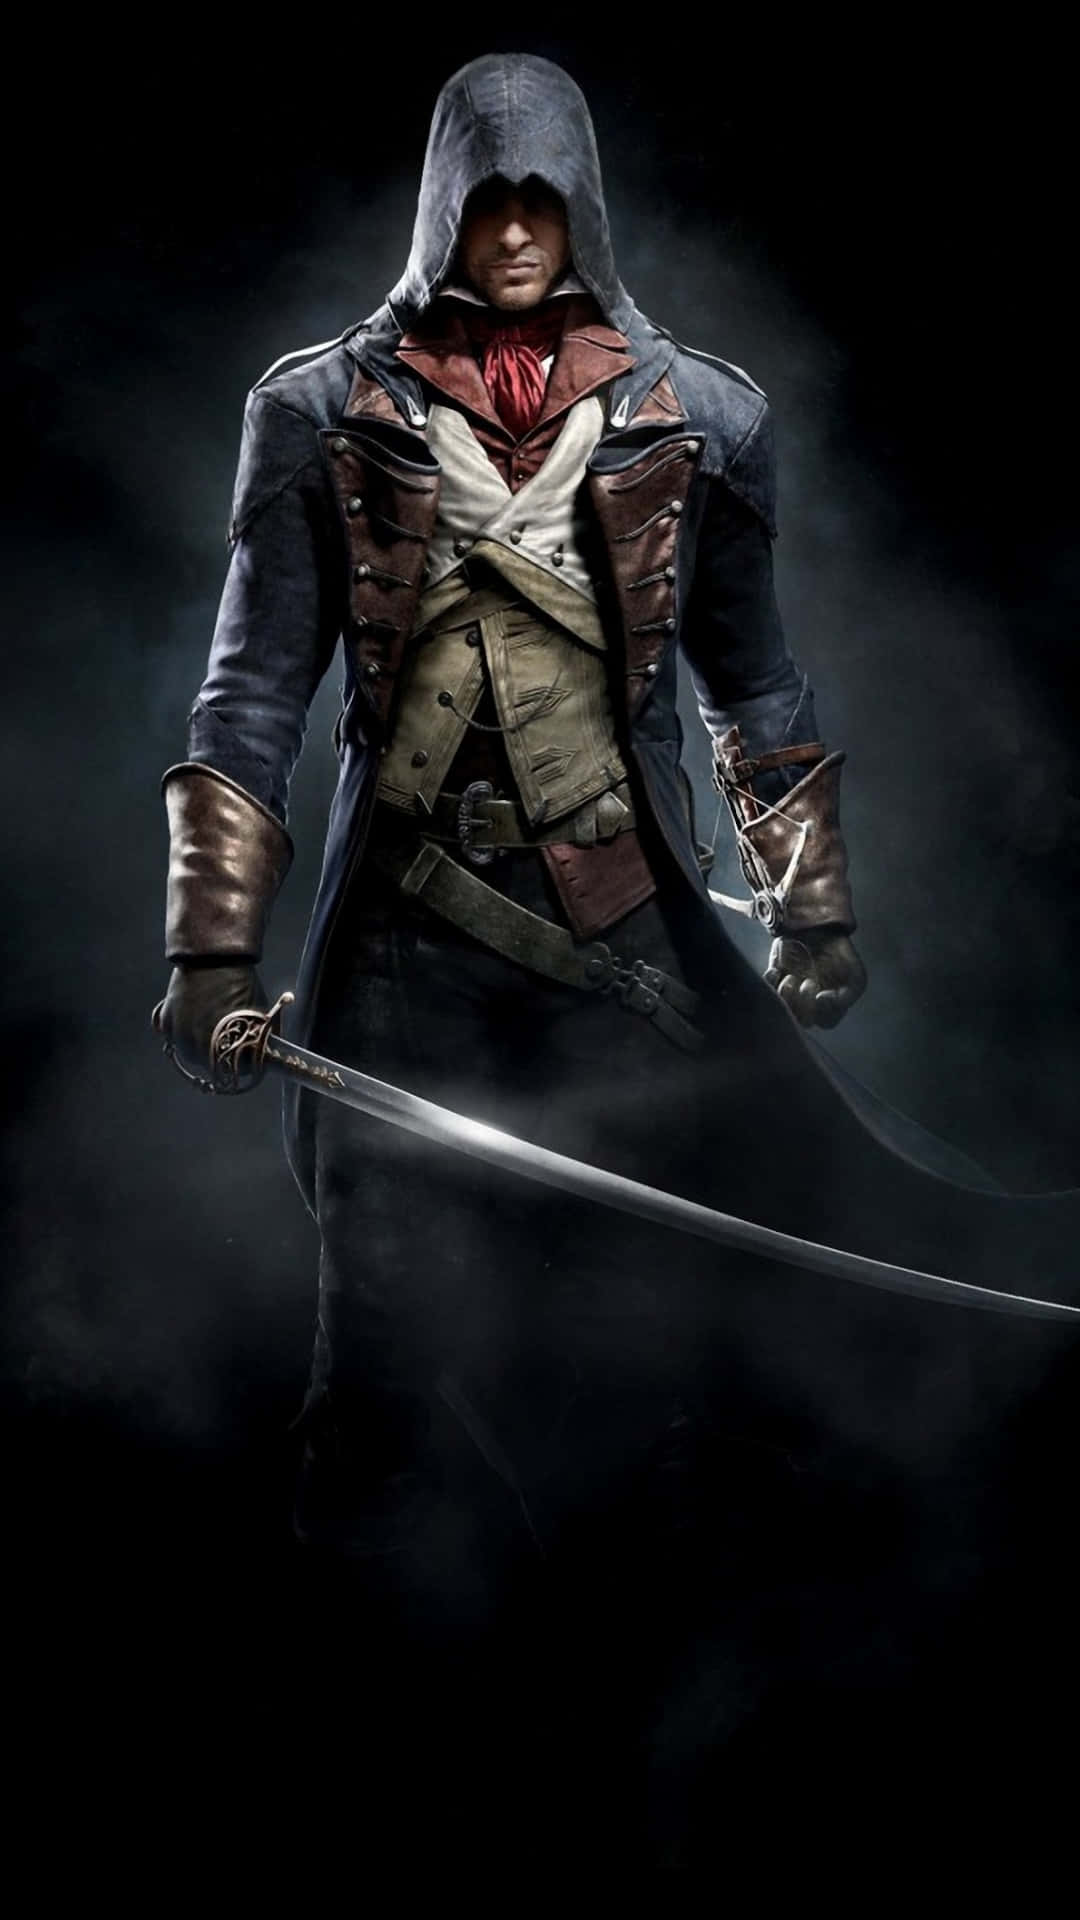 Experience The Assassins Creed World On Your Iphone